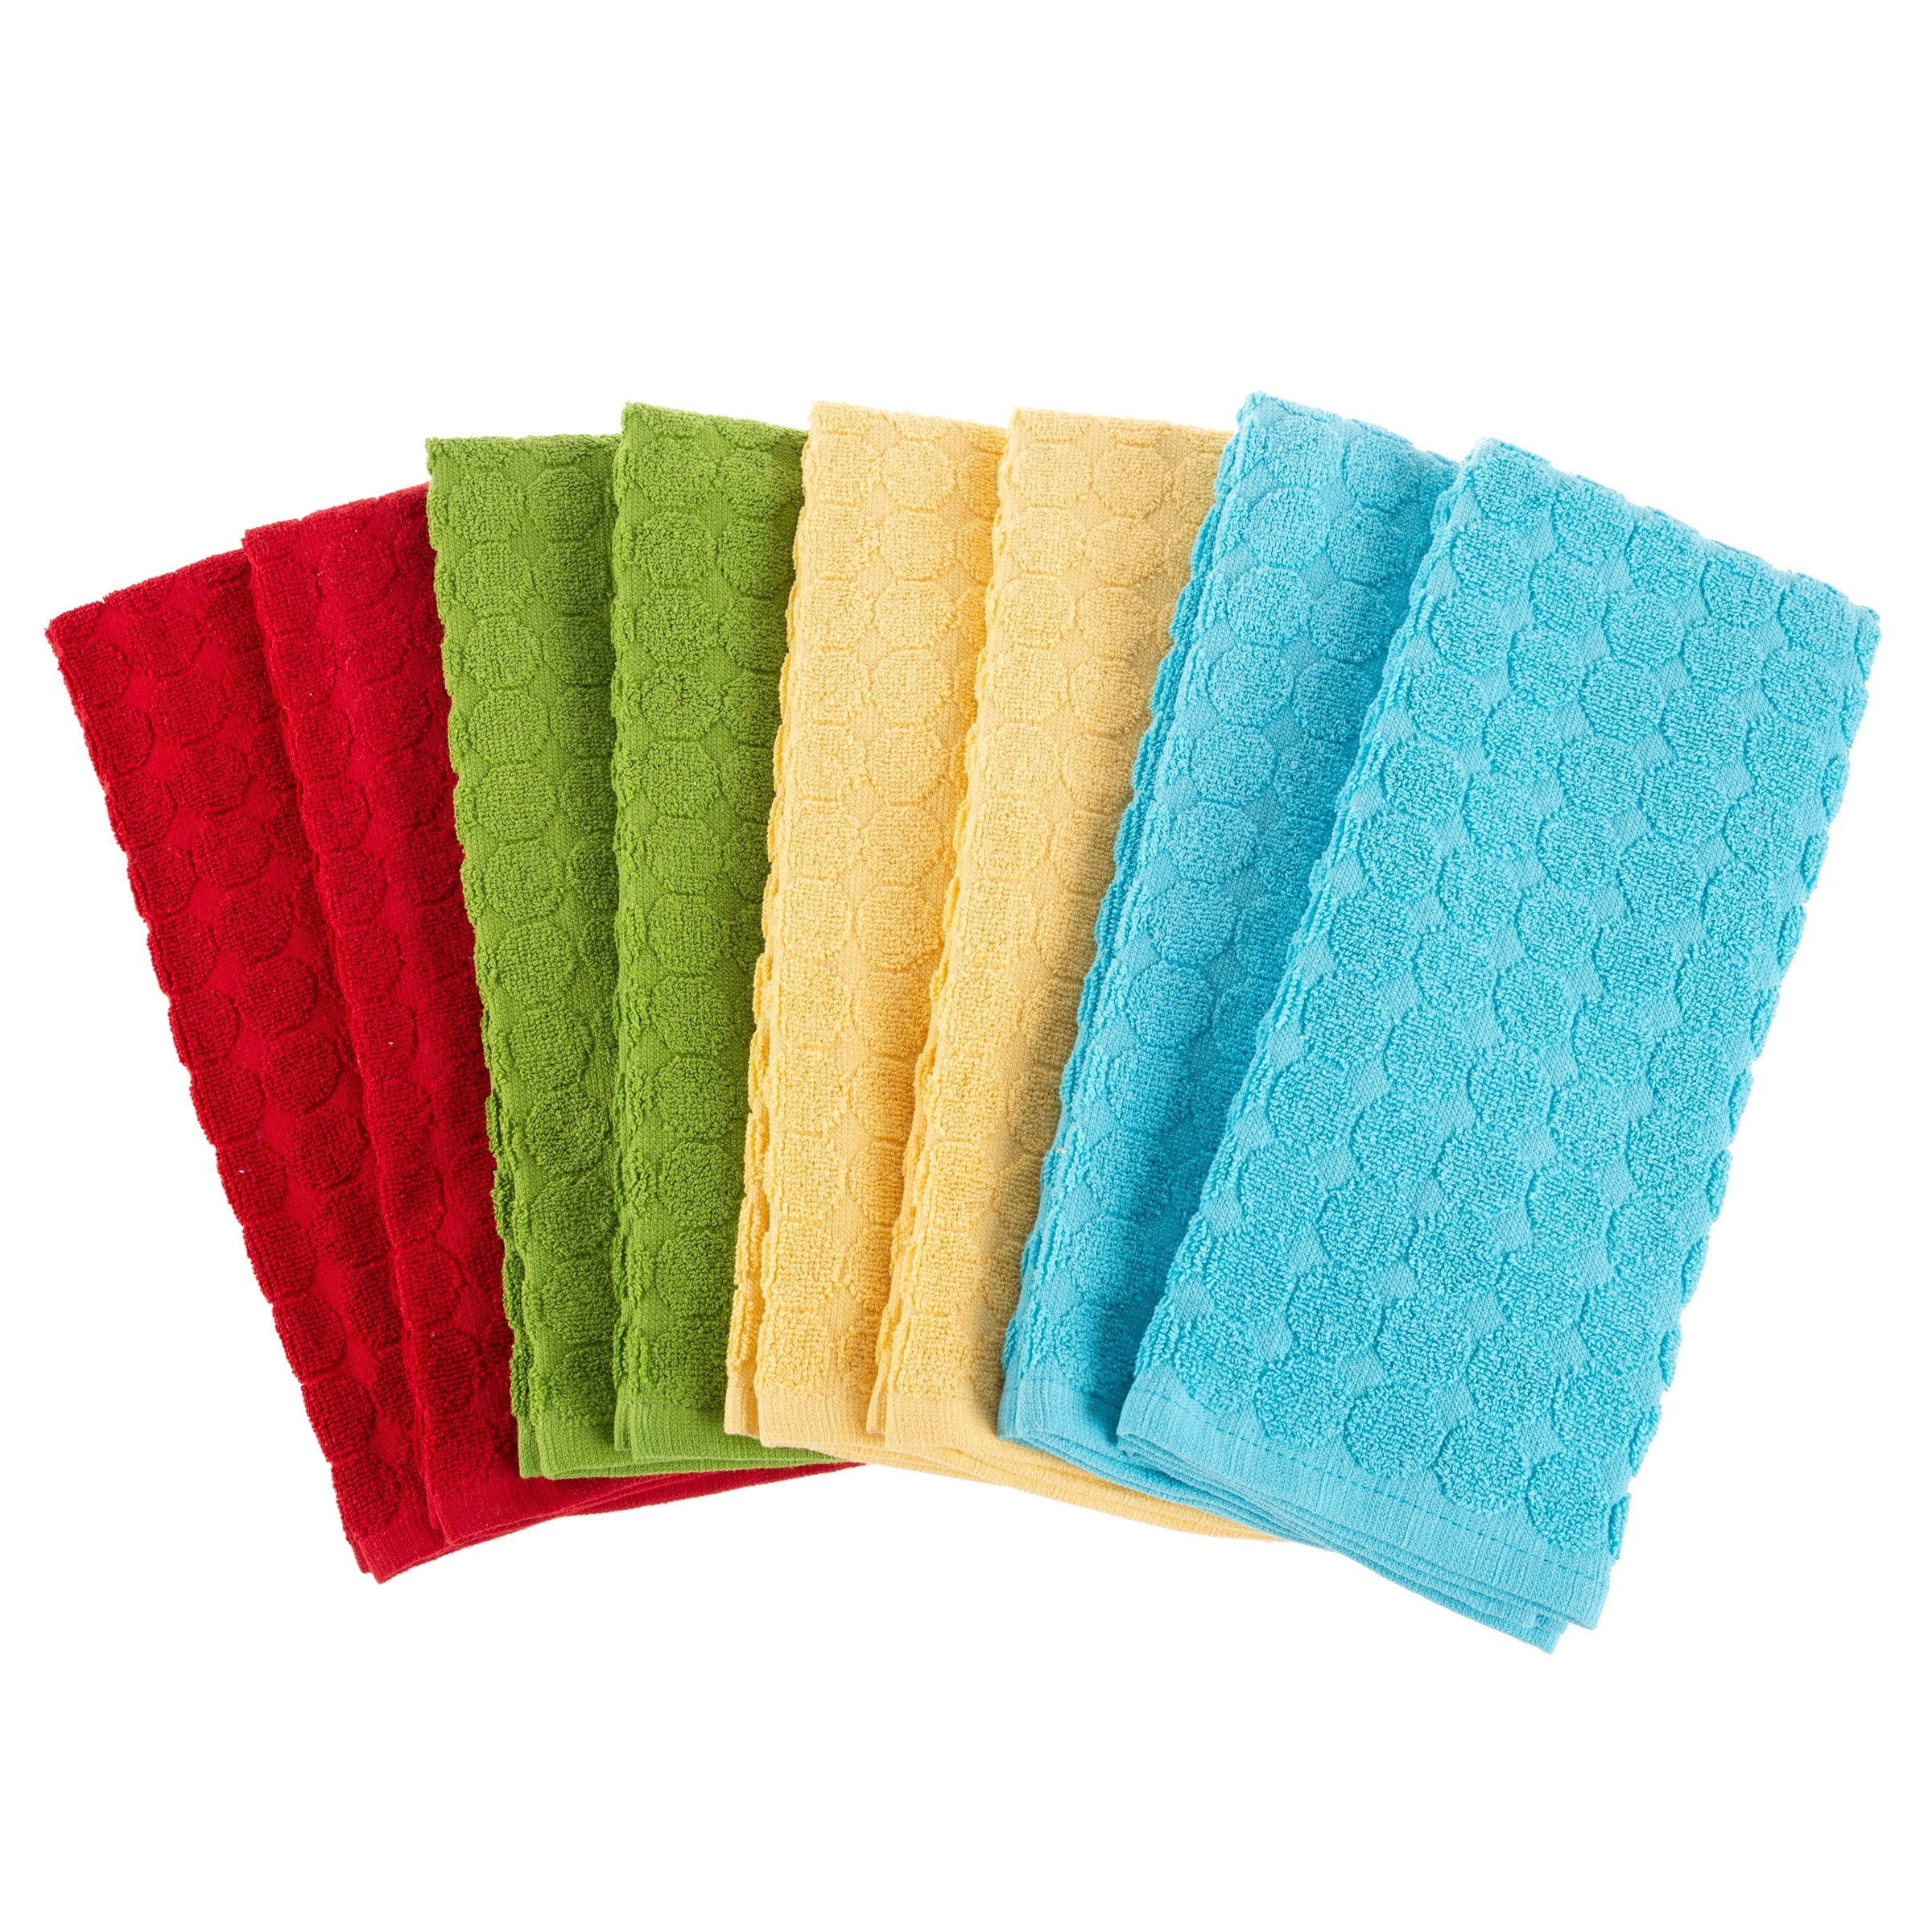 Living Fashions 8 Pack Dish Towels – Absorbent Weave Pattern